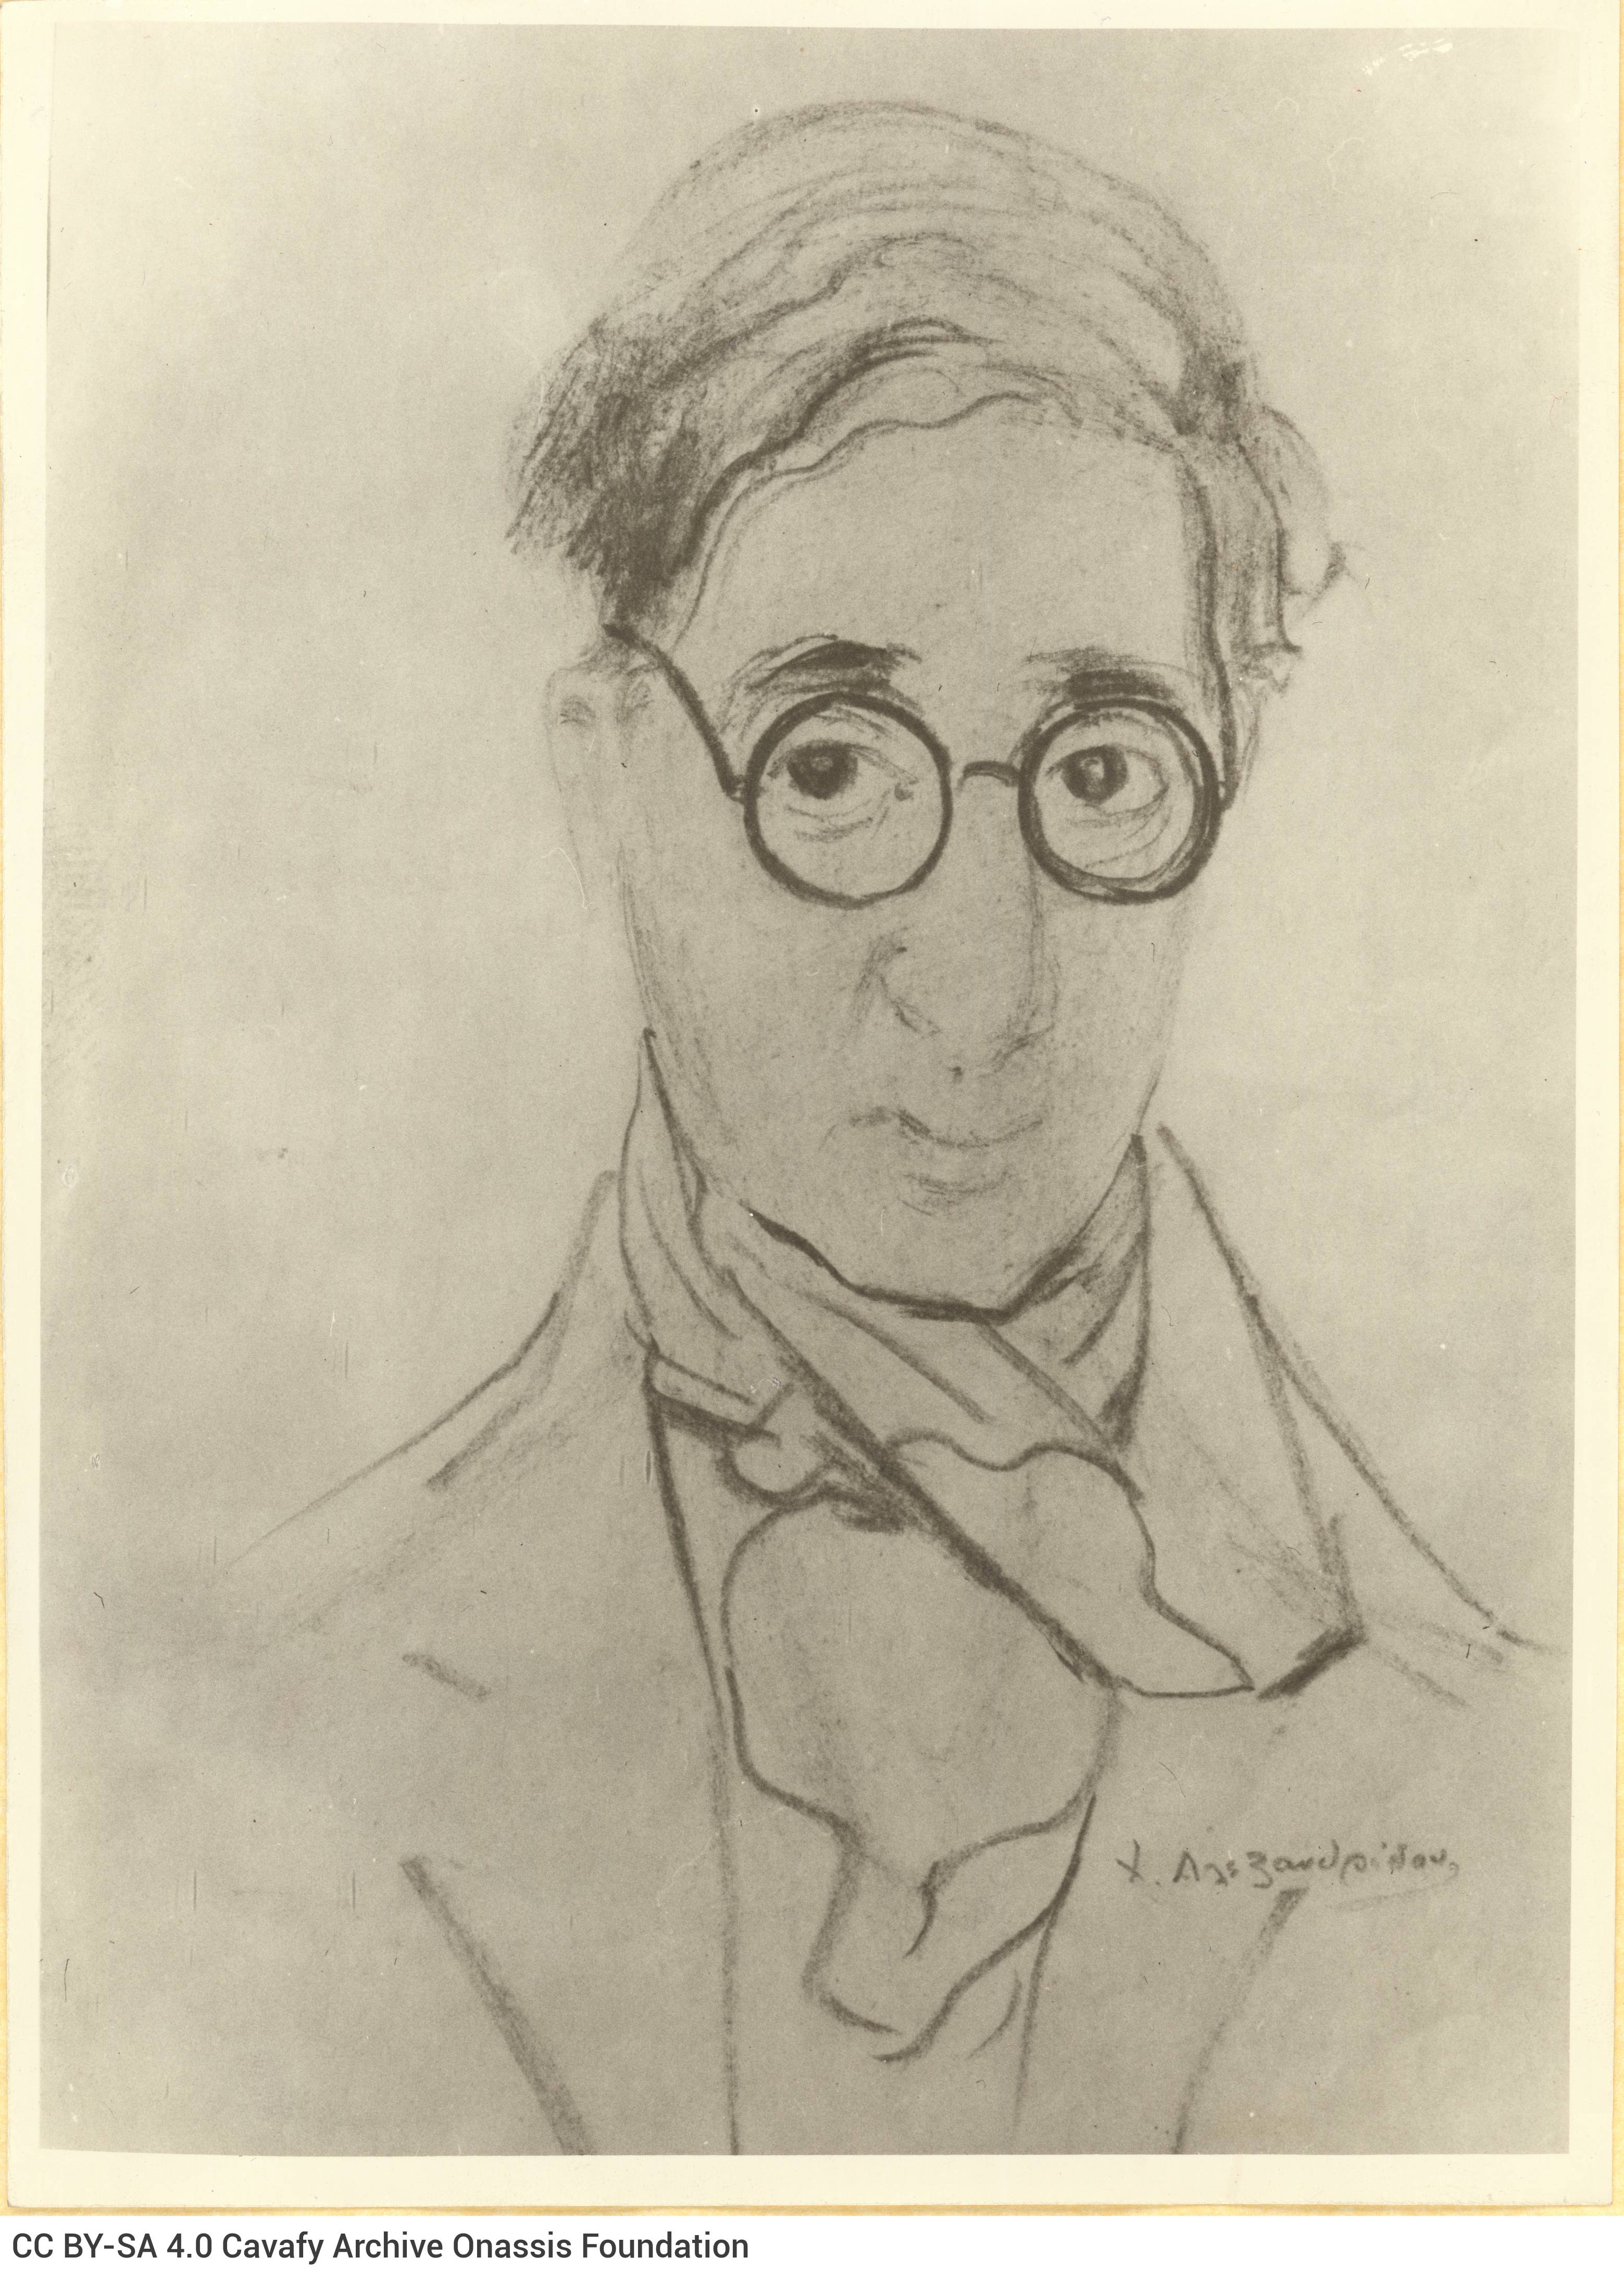 Photograph of a portrait of Cavafy, made by Charikleia Alexandridou (Stefanopoulou) and published in an issue of the journal 